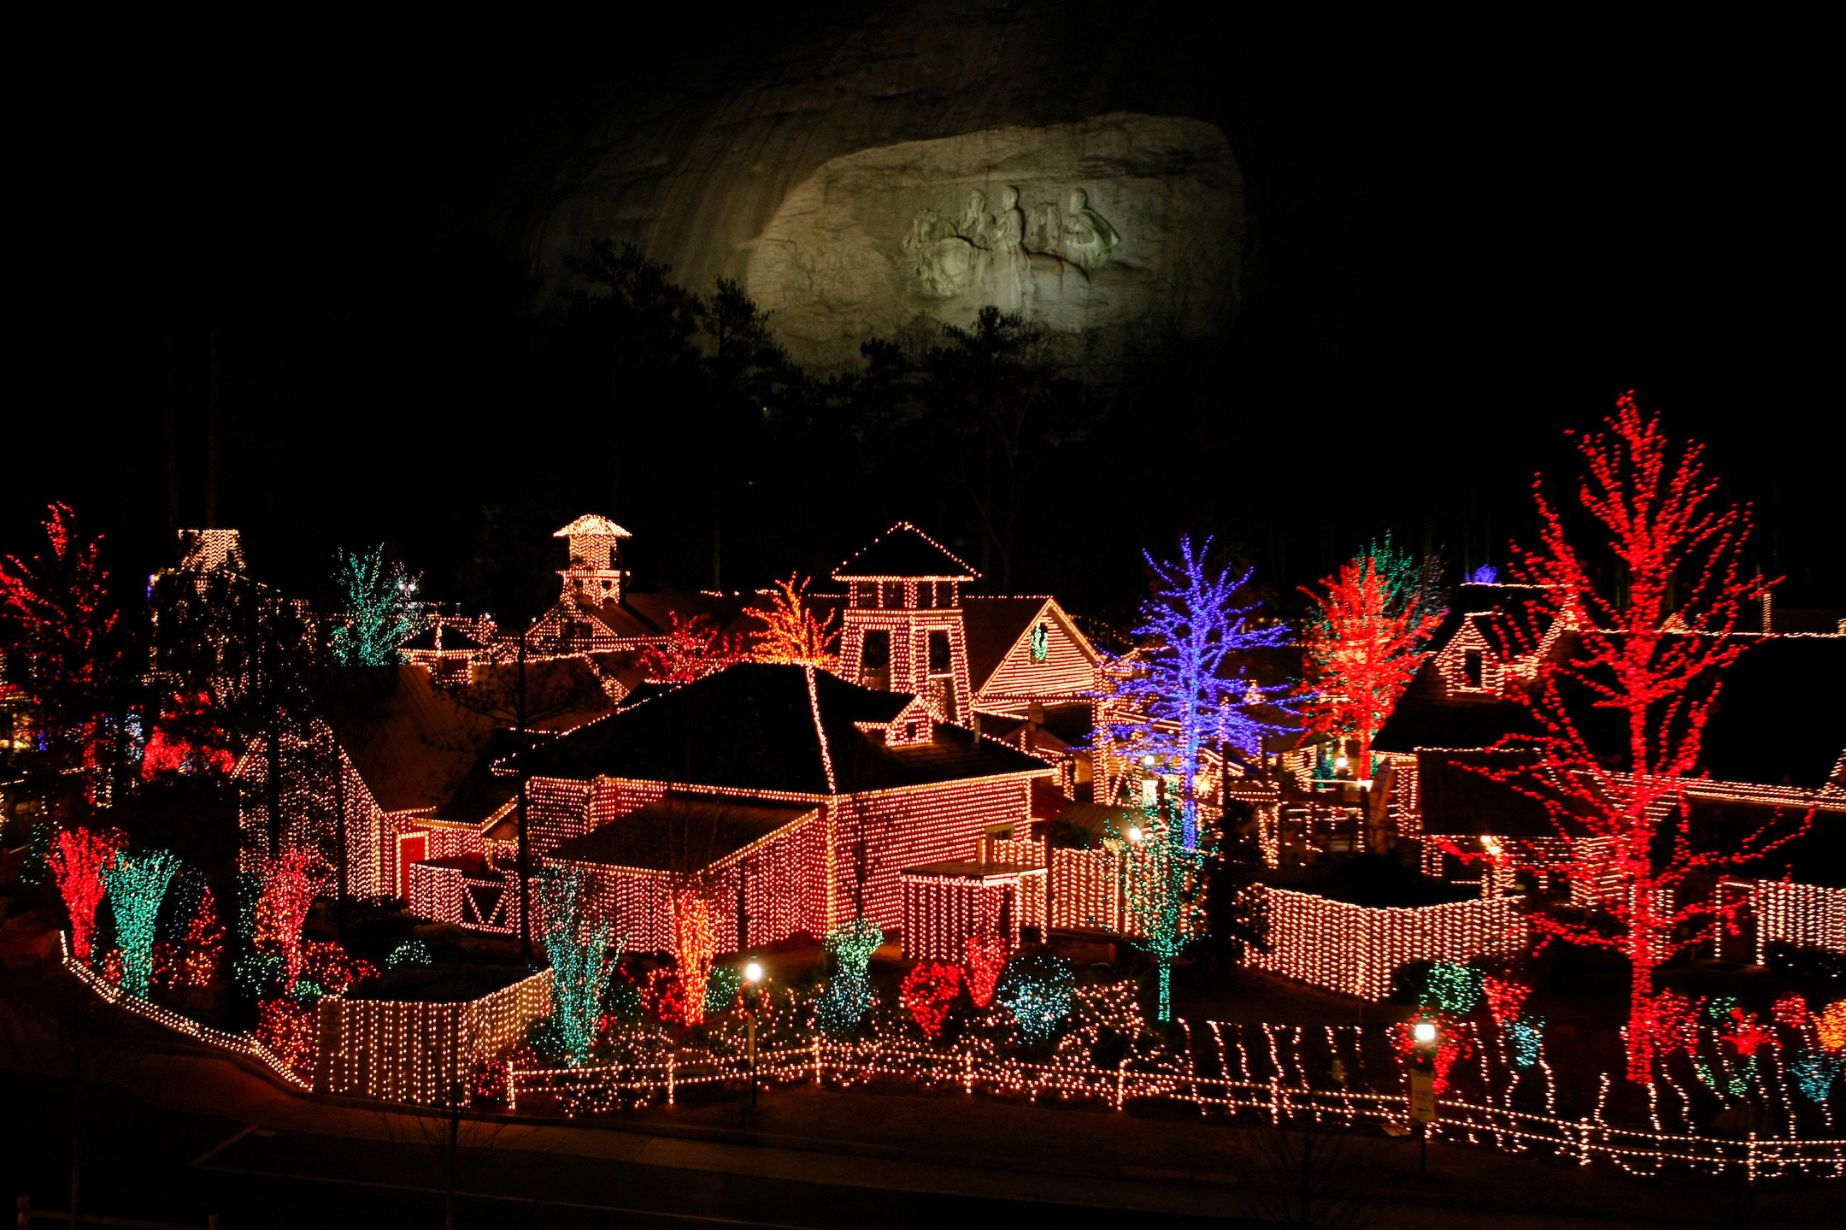 Stone Mountain Park Village lit up for Christmas